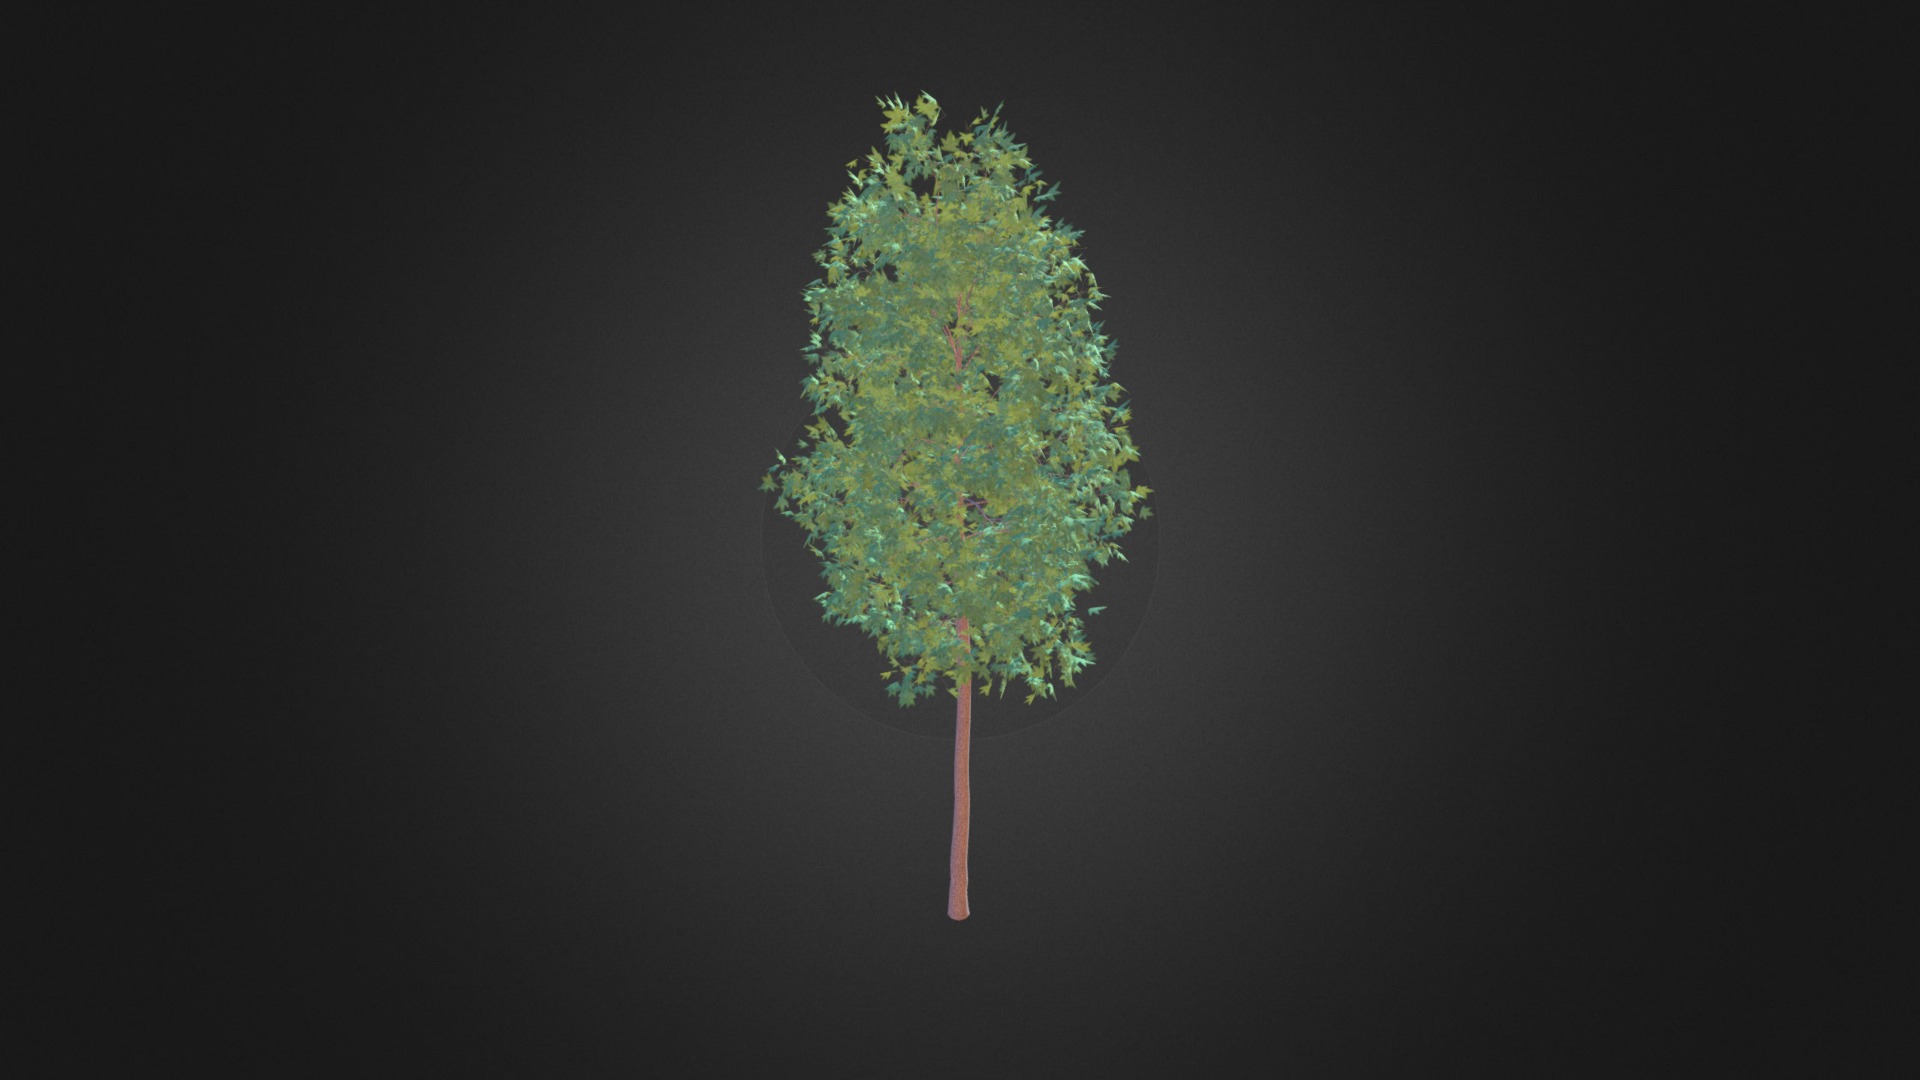 3D model American Sweetgum 3D Model 2.3m - This is a 3D model of the American Sweetgum 3D Model 2.3m. The 3D model is about a green and red tree.